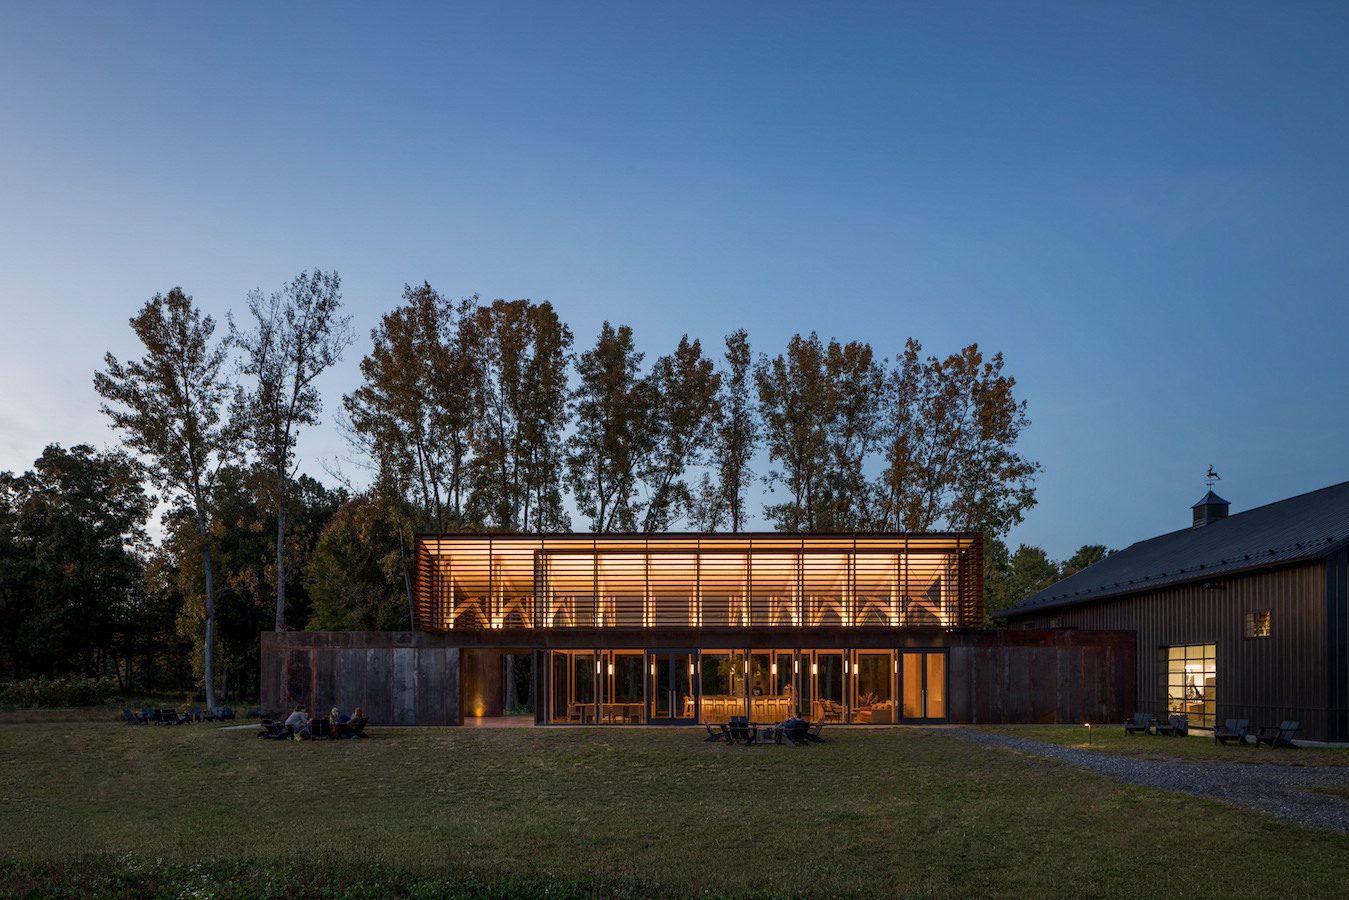 A modern farmhouse in the middle of a field at dusk.